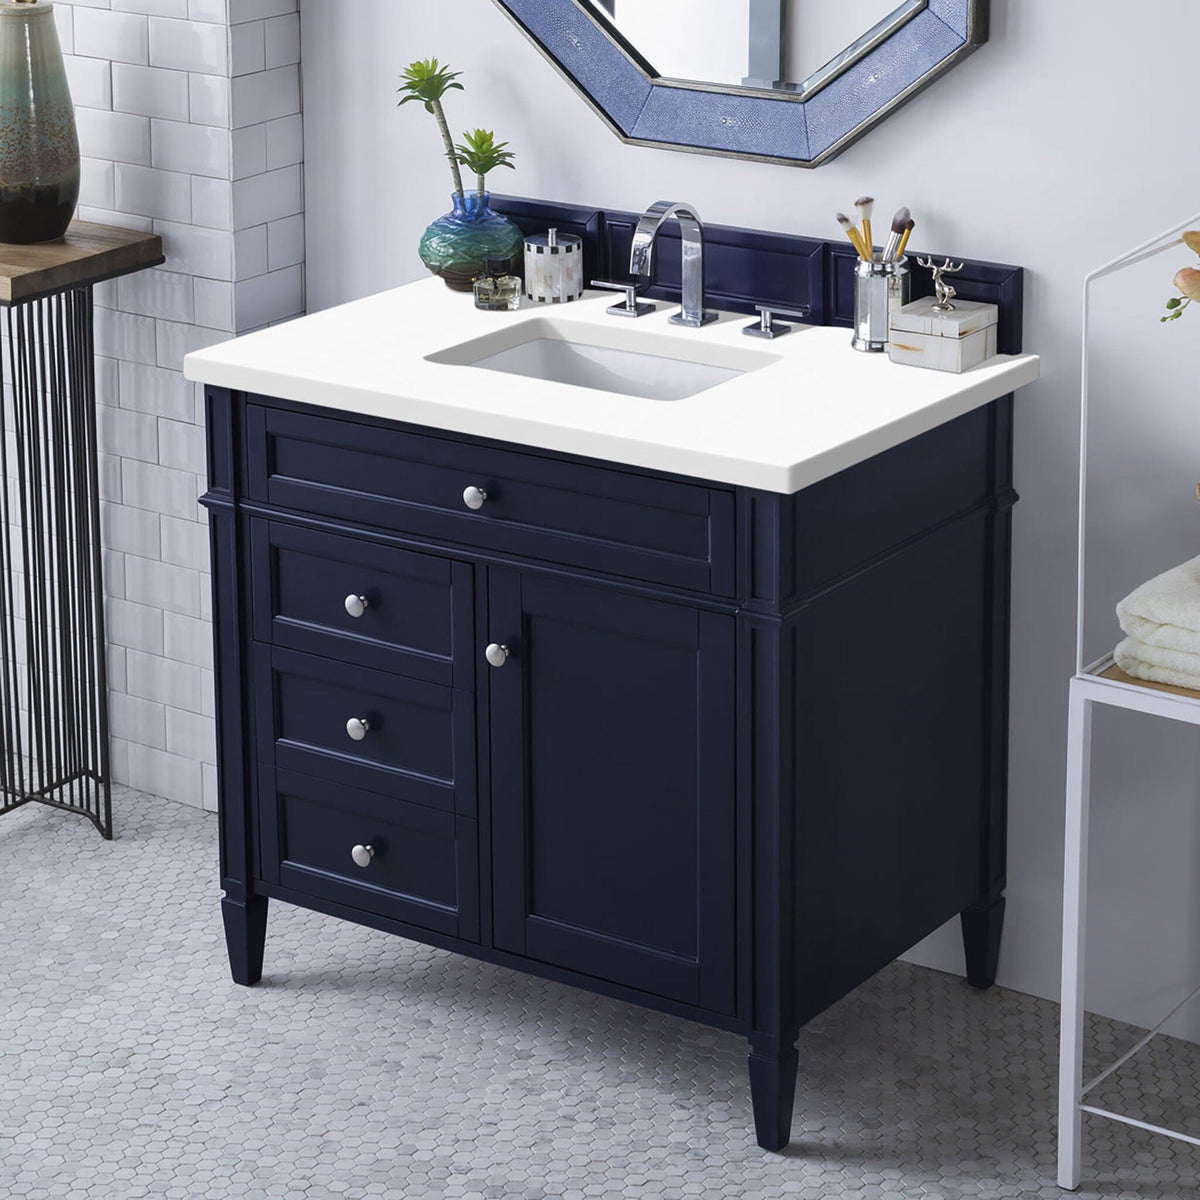 HEMNES Sink cabinet with 2 drawers, blue, 311/2x181/2x325/8 - IKEA